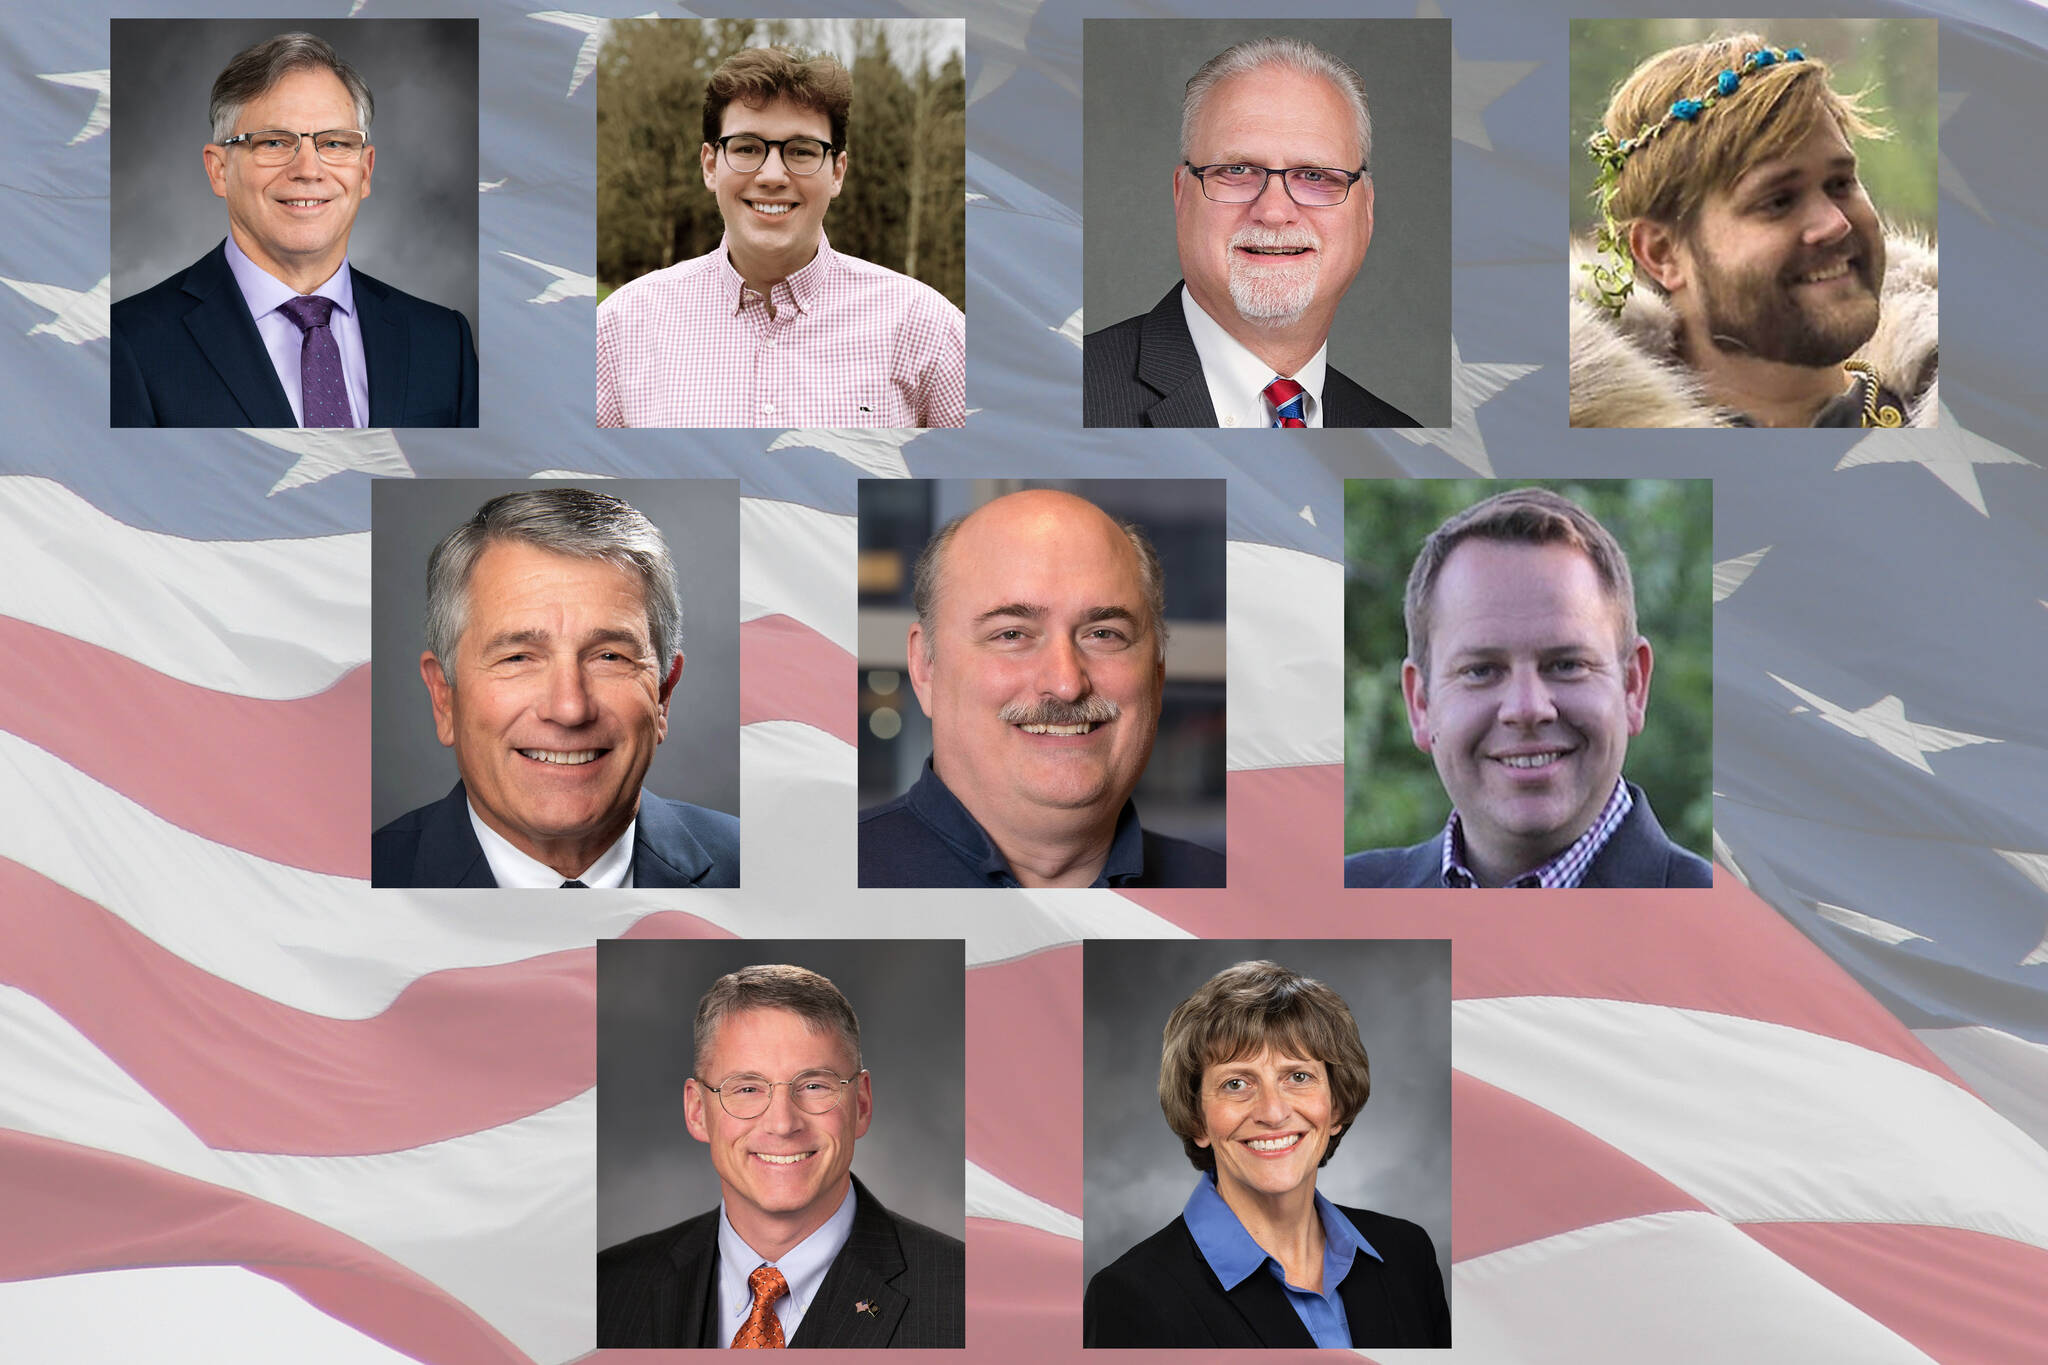 Candidates running for the 5th and 12th legislative districts. Top row: 5th District seat 1 (from left) Bill Ramos, Landon Halverson, Ken Moninski, and Austin Bryant; Middle Row 12th district seat 1 and 2: Keith Goehner, Robert Amenn and Mike Steele; Bottom row 5th District seat 2: Chad Magendanz and Lisa Callan.